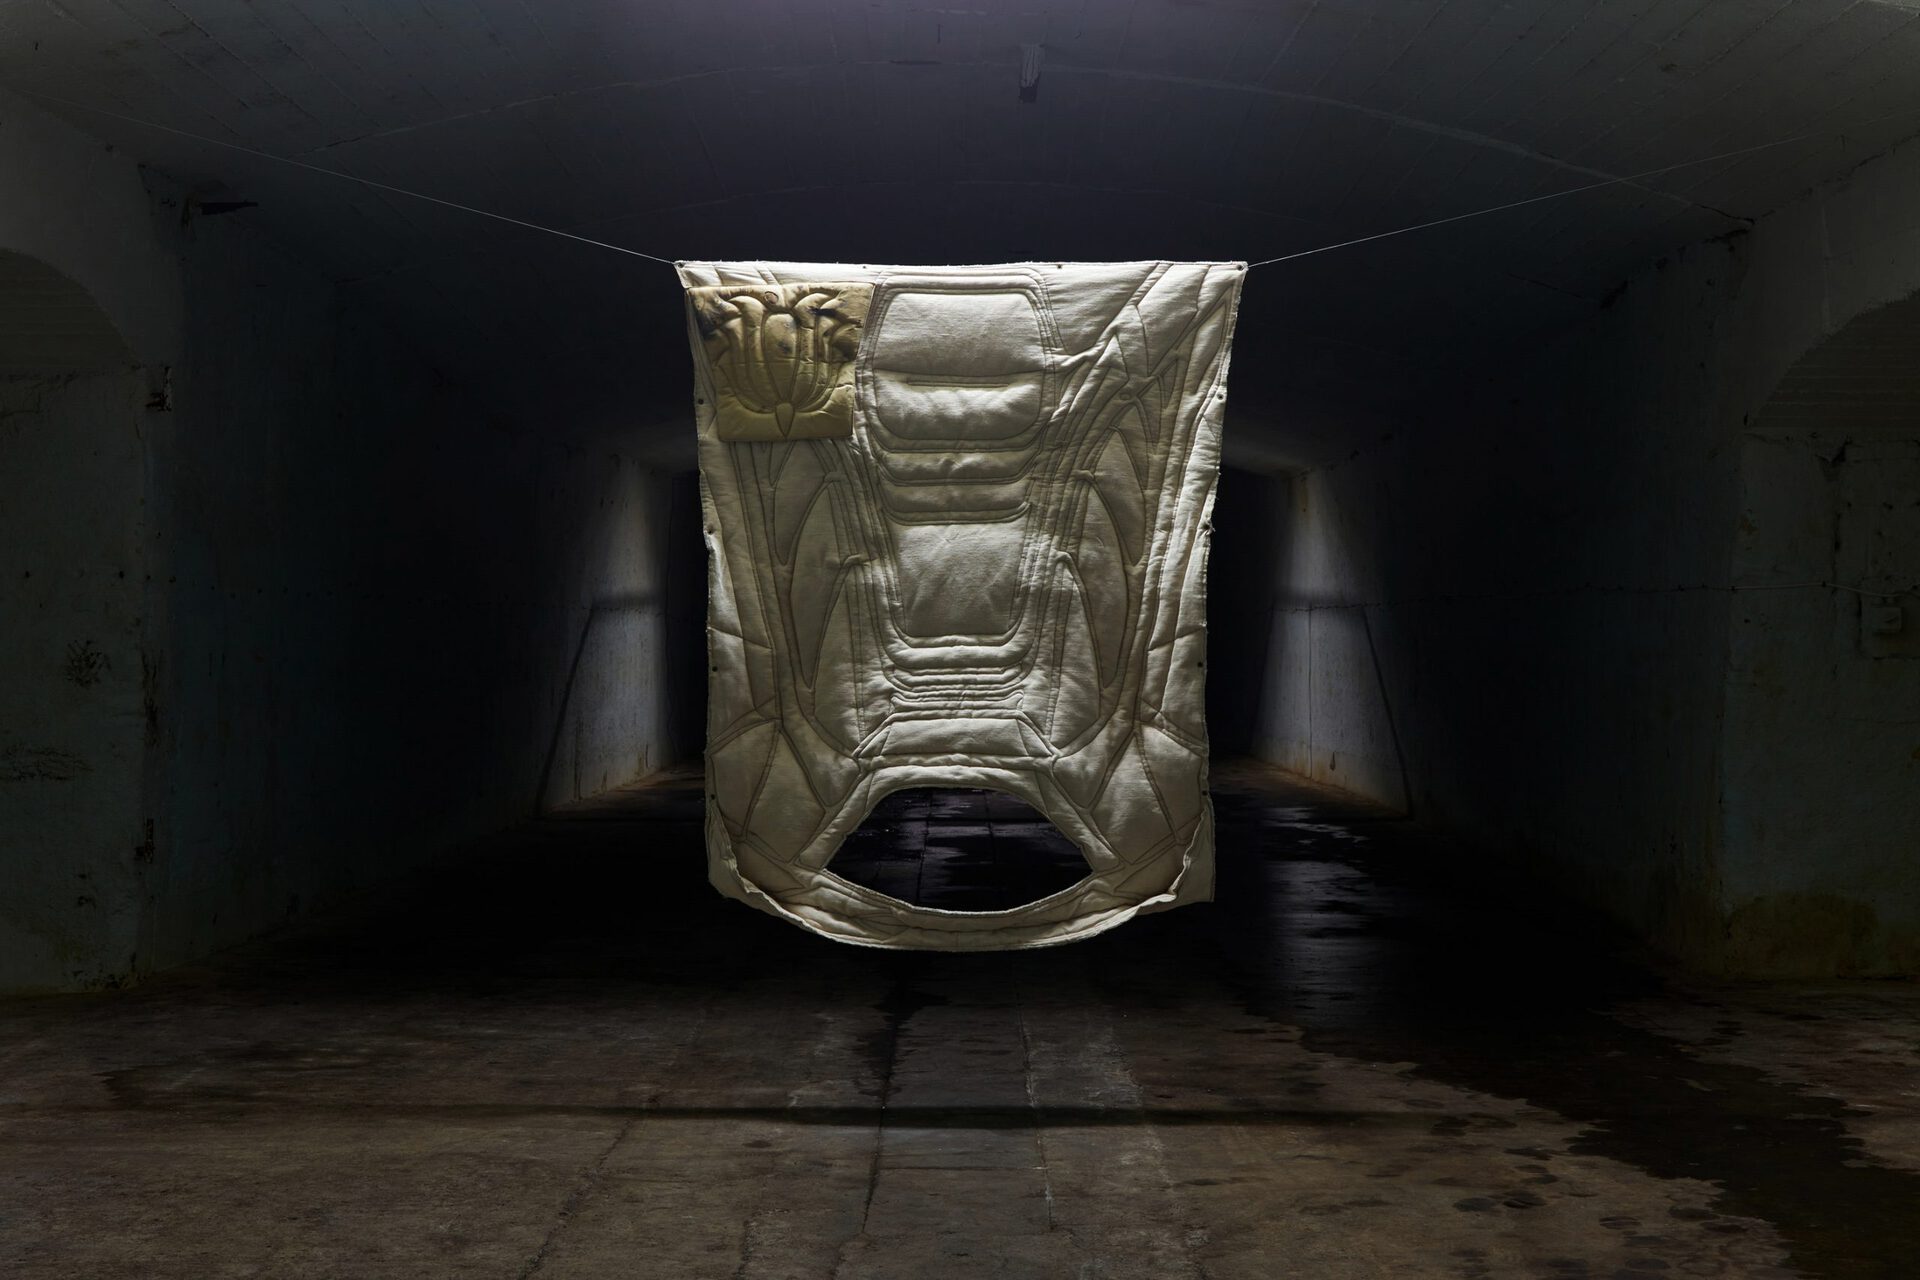 Adrian Kiss, DUNYHA ACTIVE, 2020, Quilted leather and linen with fleece lining, 200 x 140 x 3 cm